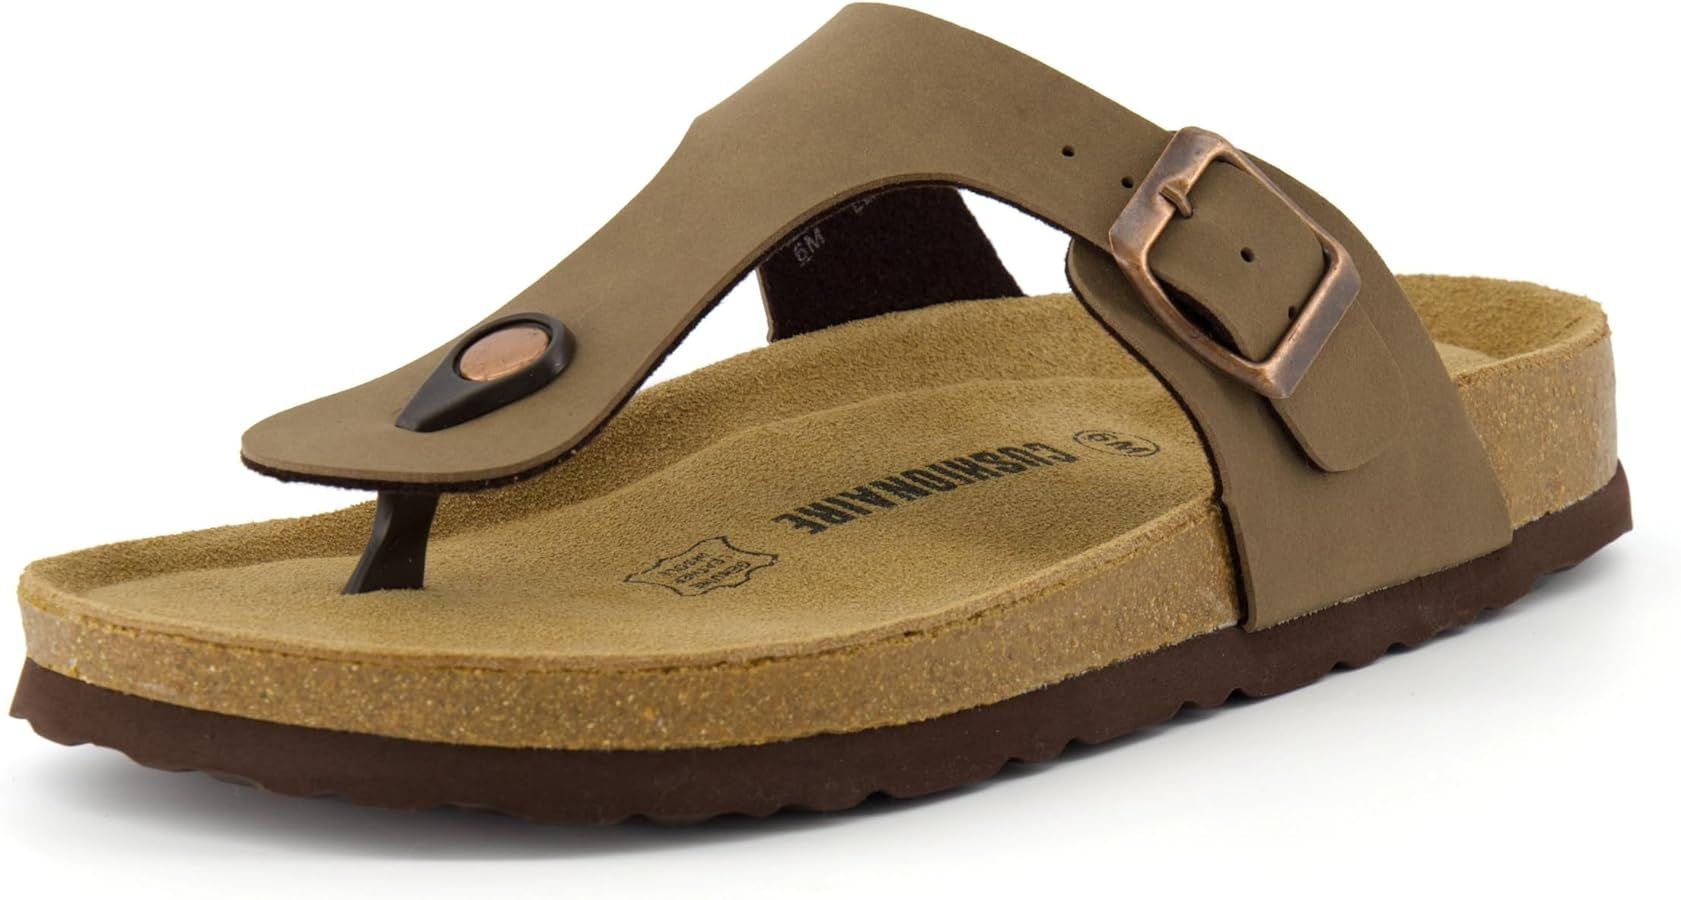 CUSHIONAIRE Women's Leah Cork Footbed Sandal With +Comfort | Amazon (US)